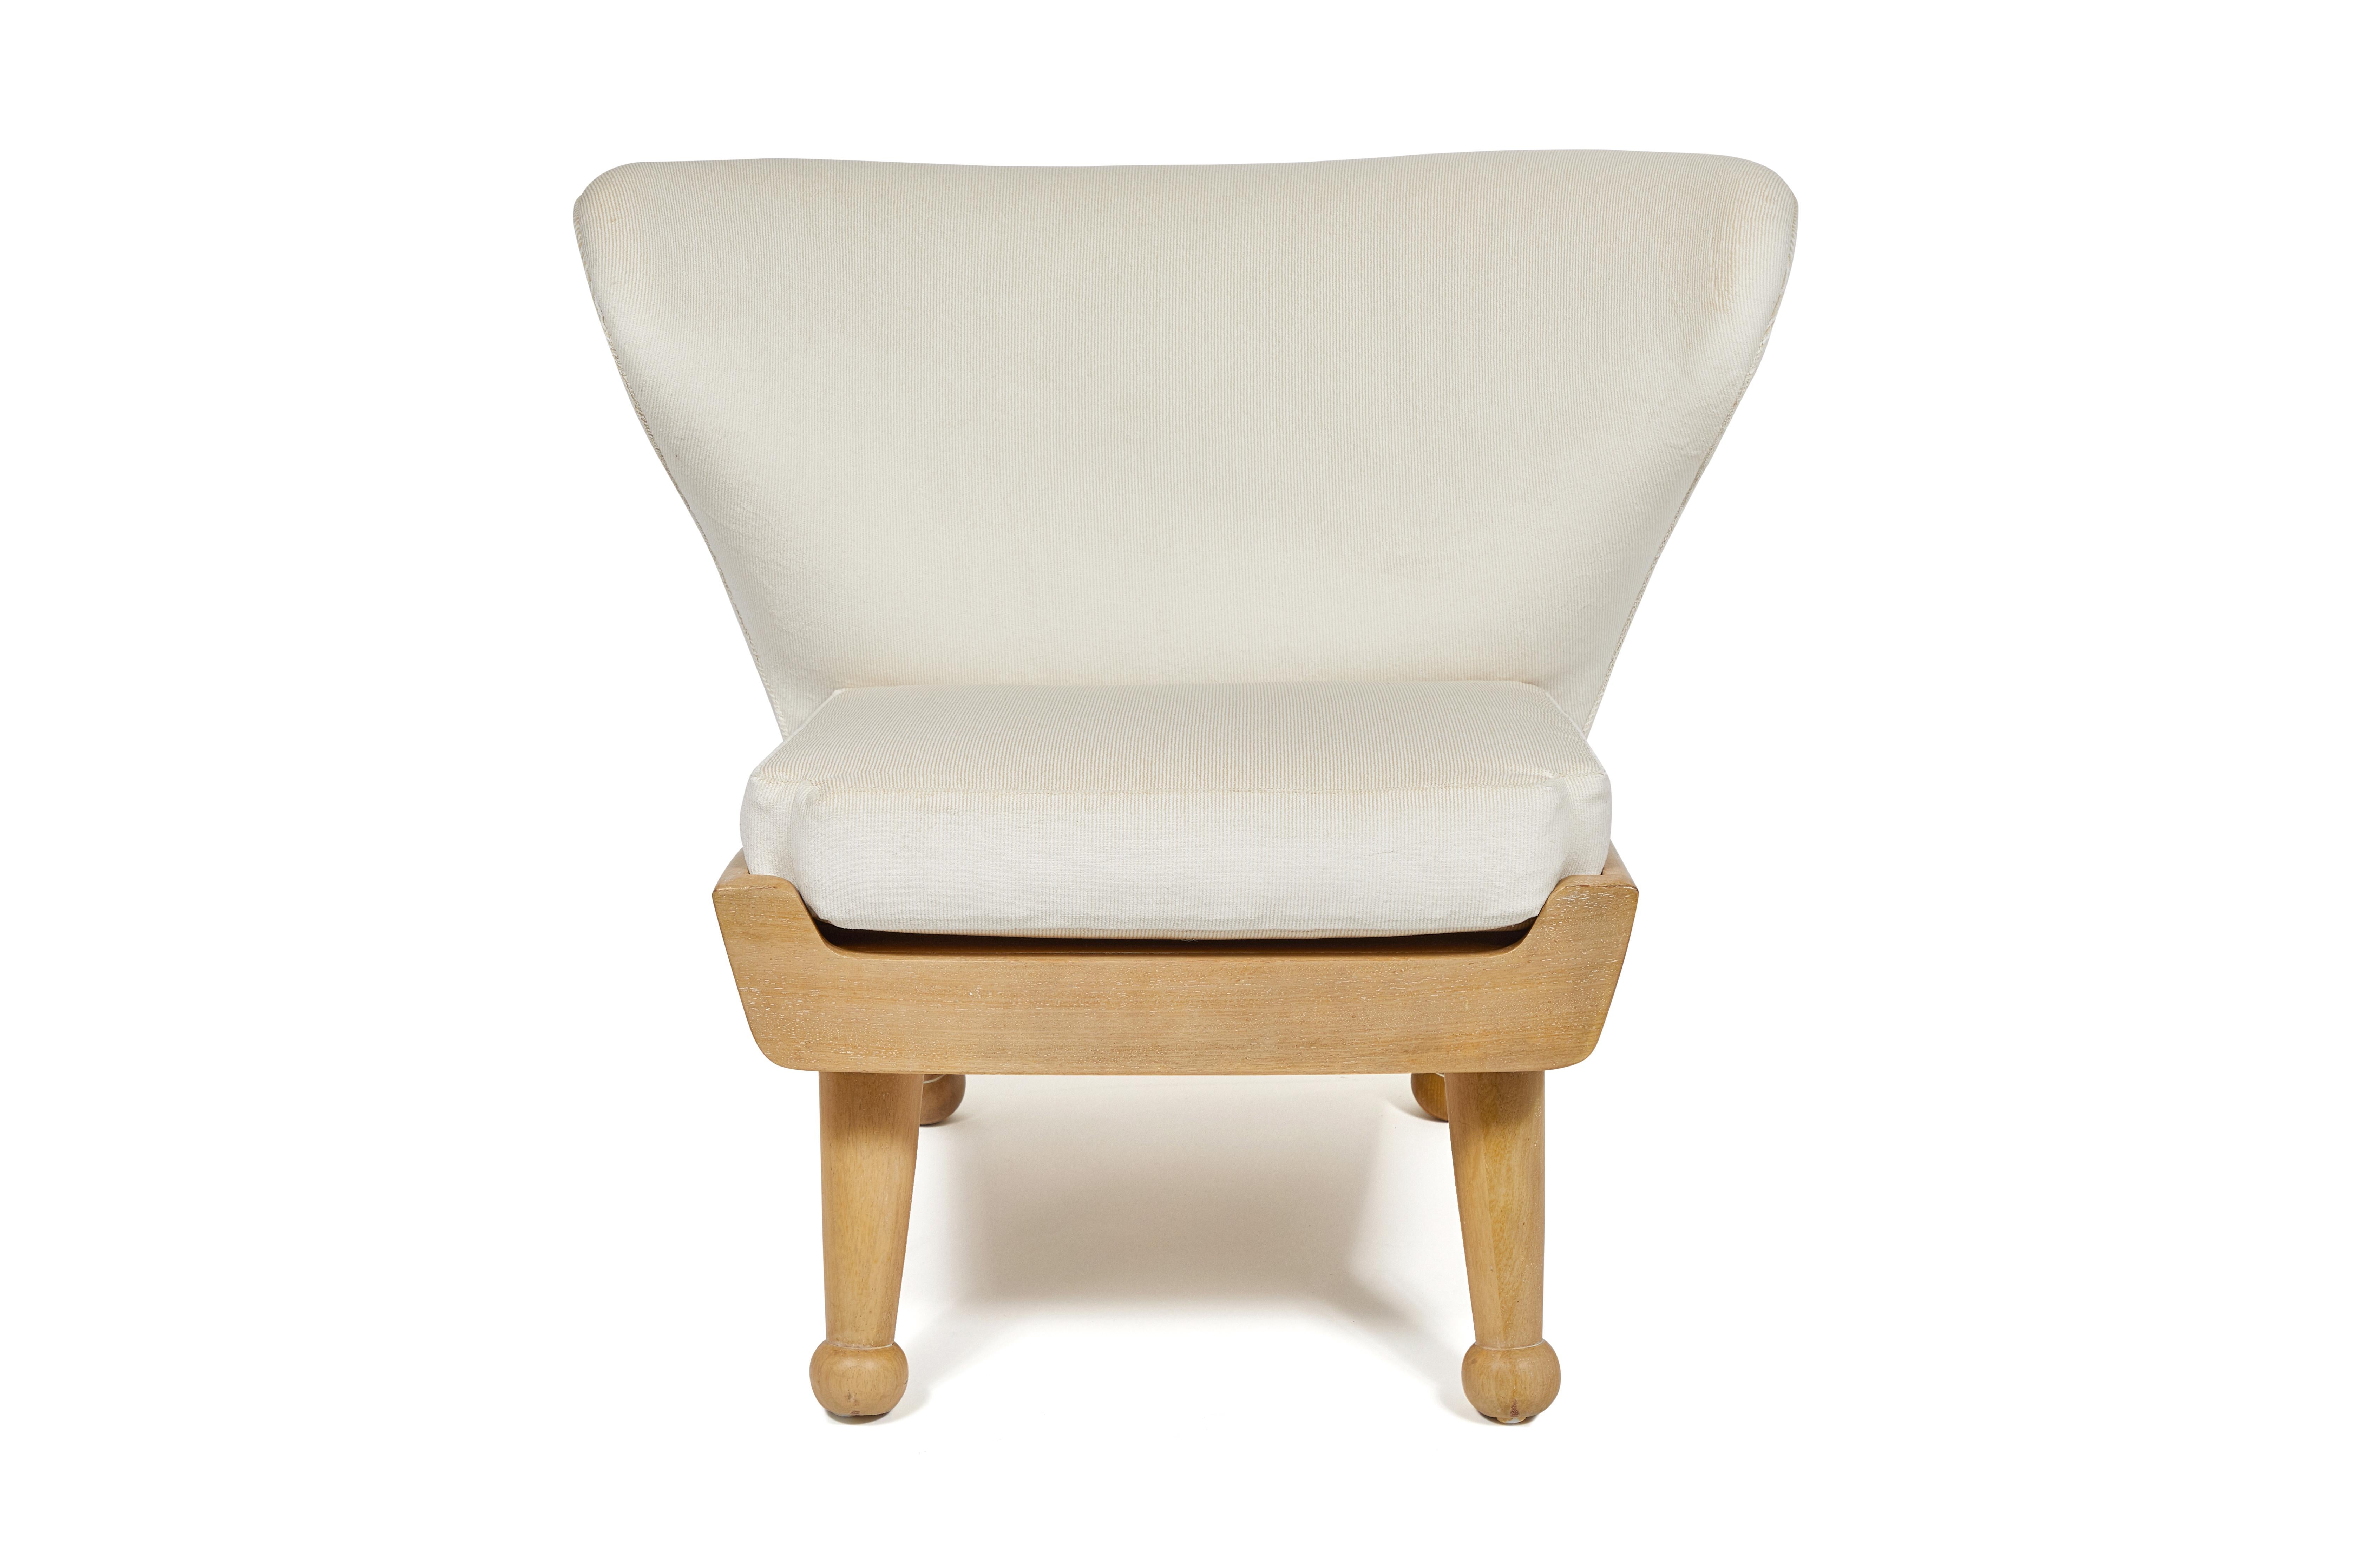 Our Hayworth lounge chair has a winged back and low-profile design. Offered here with our coordinated ottoman. Features upholstered back cushion and removable seat cushion, made of outdoor dry-fast foam. Base and legs are made of bleached & lightly